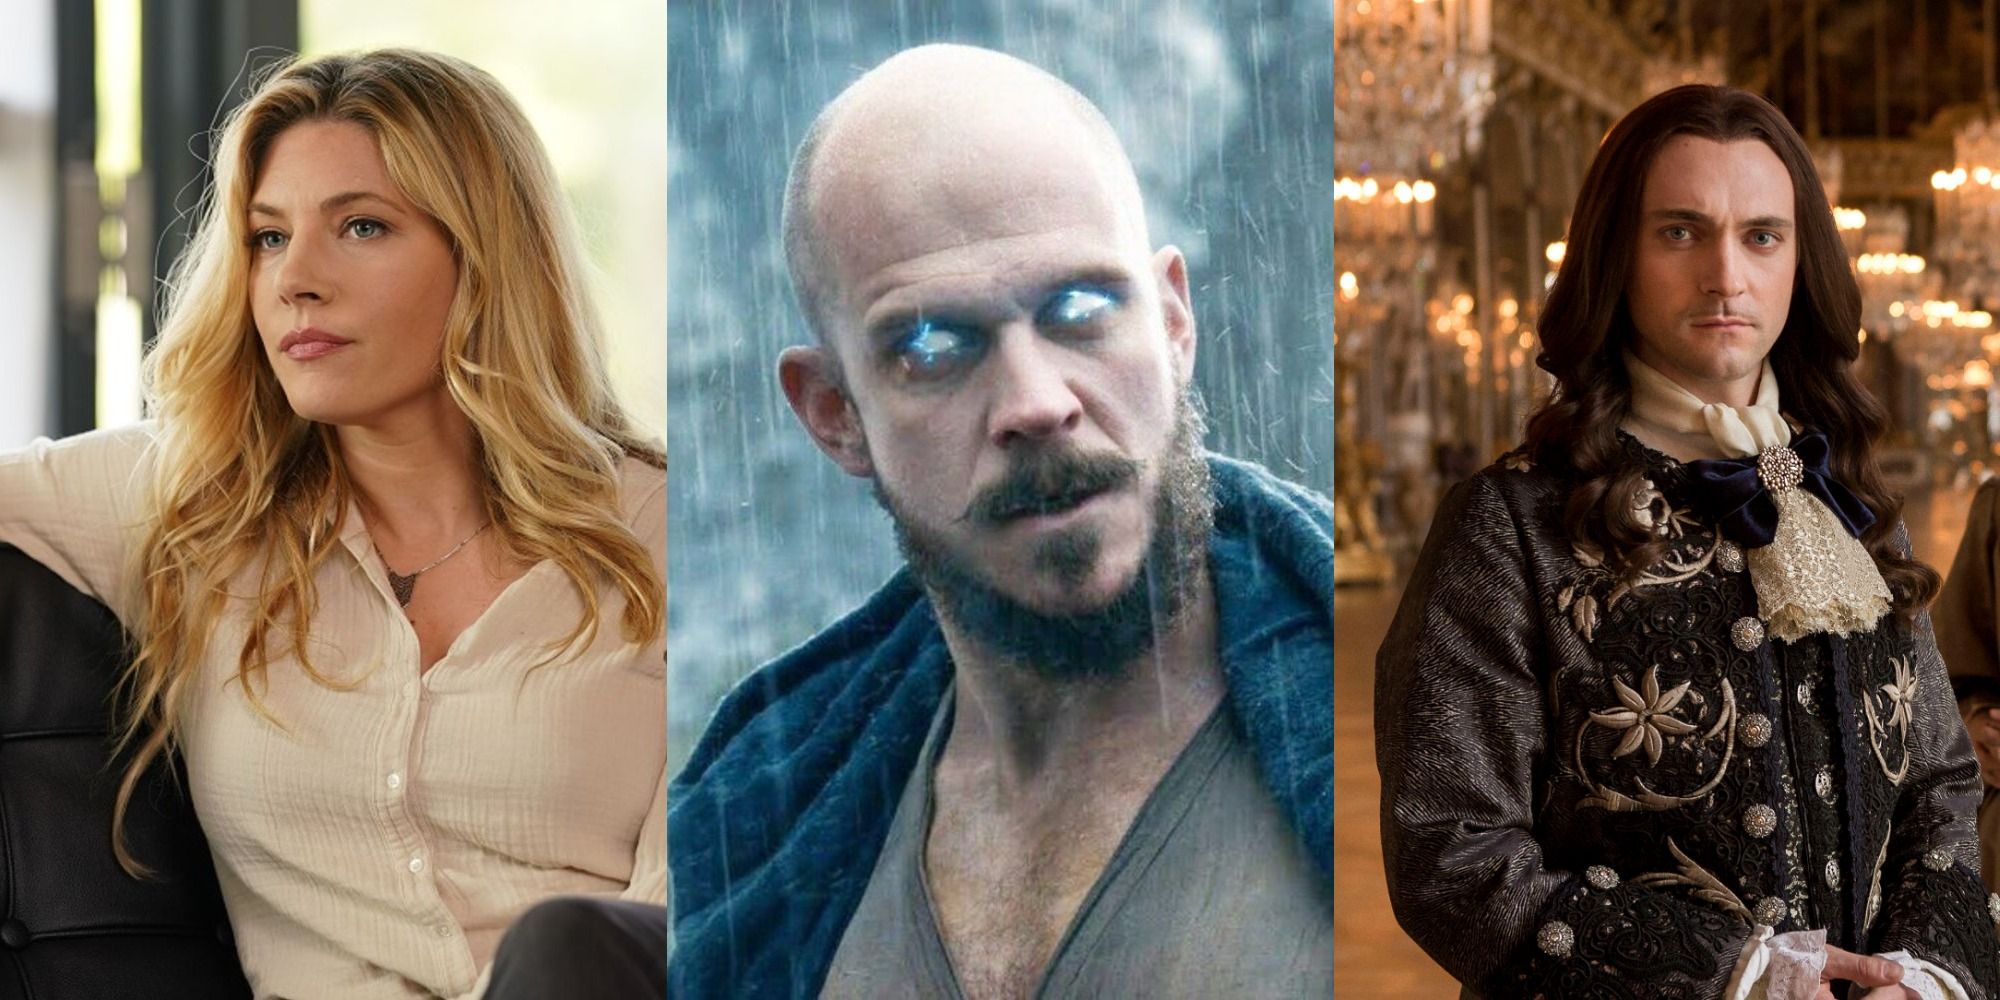 Vikings Cast In Real Life 2020